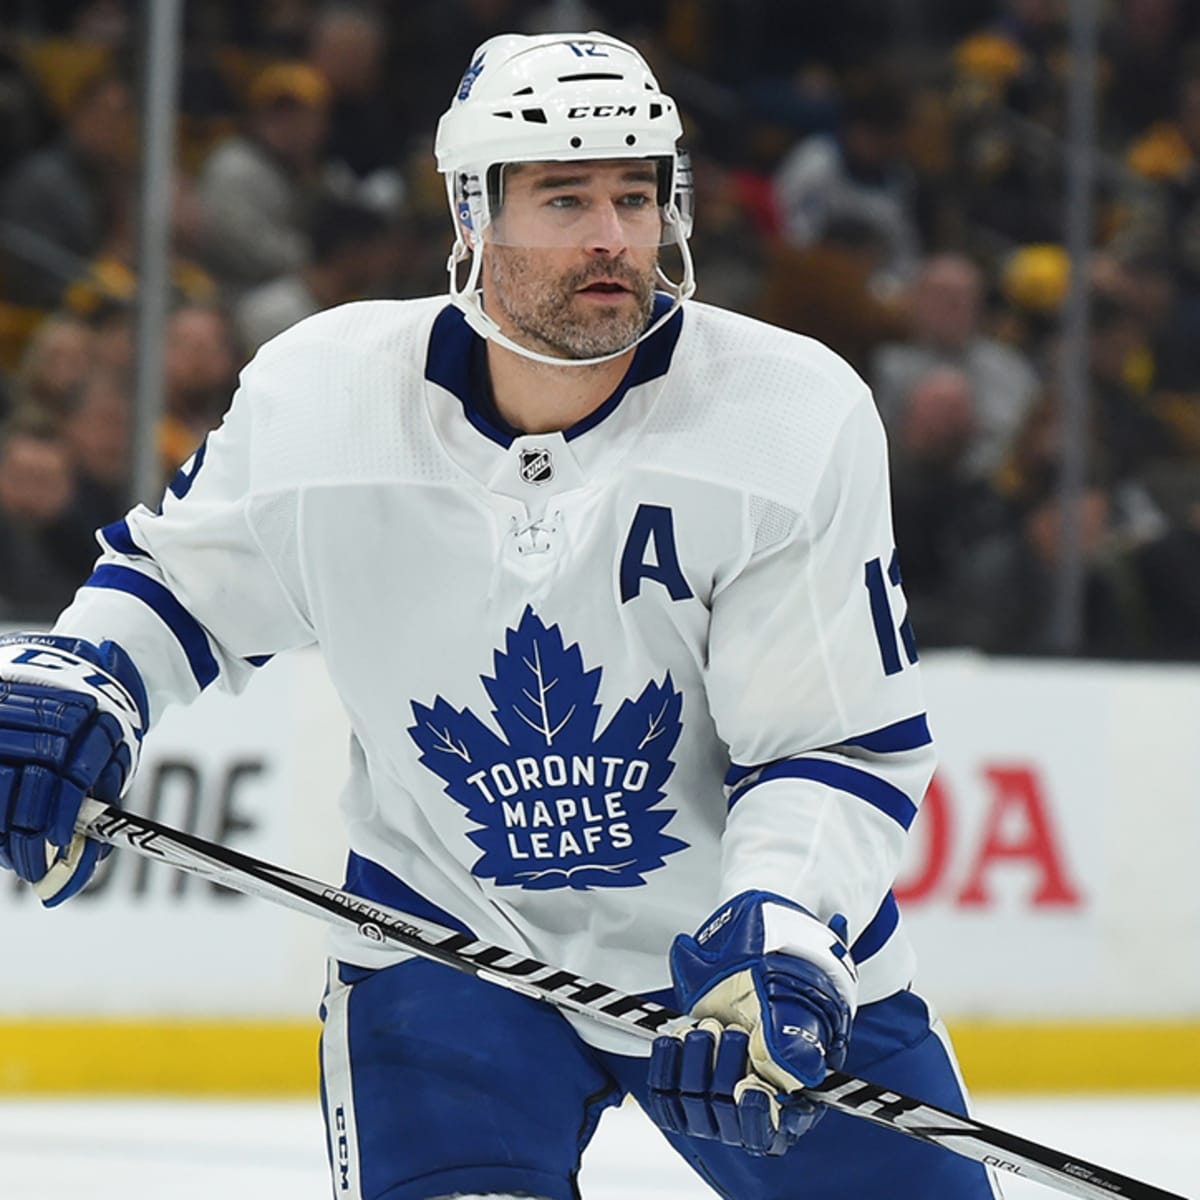 Patrick Marleau Traded to Penguins from Sharks for NHL Draft Pick